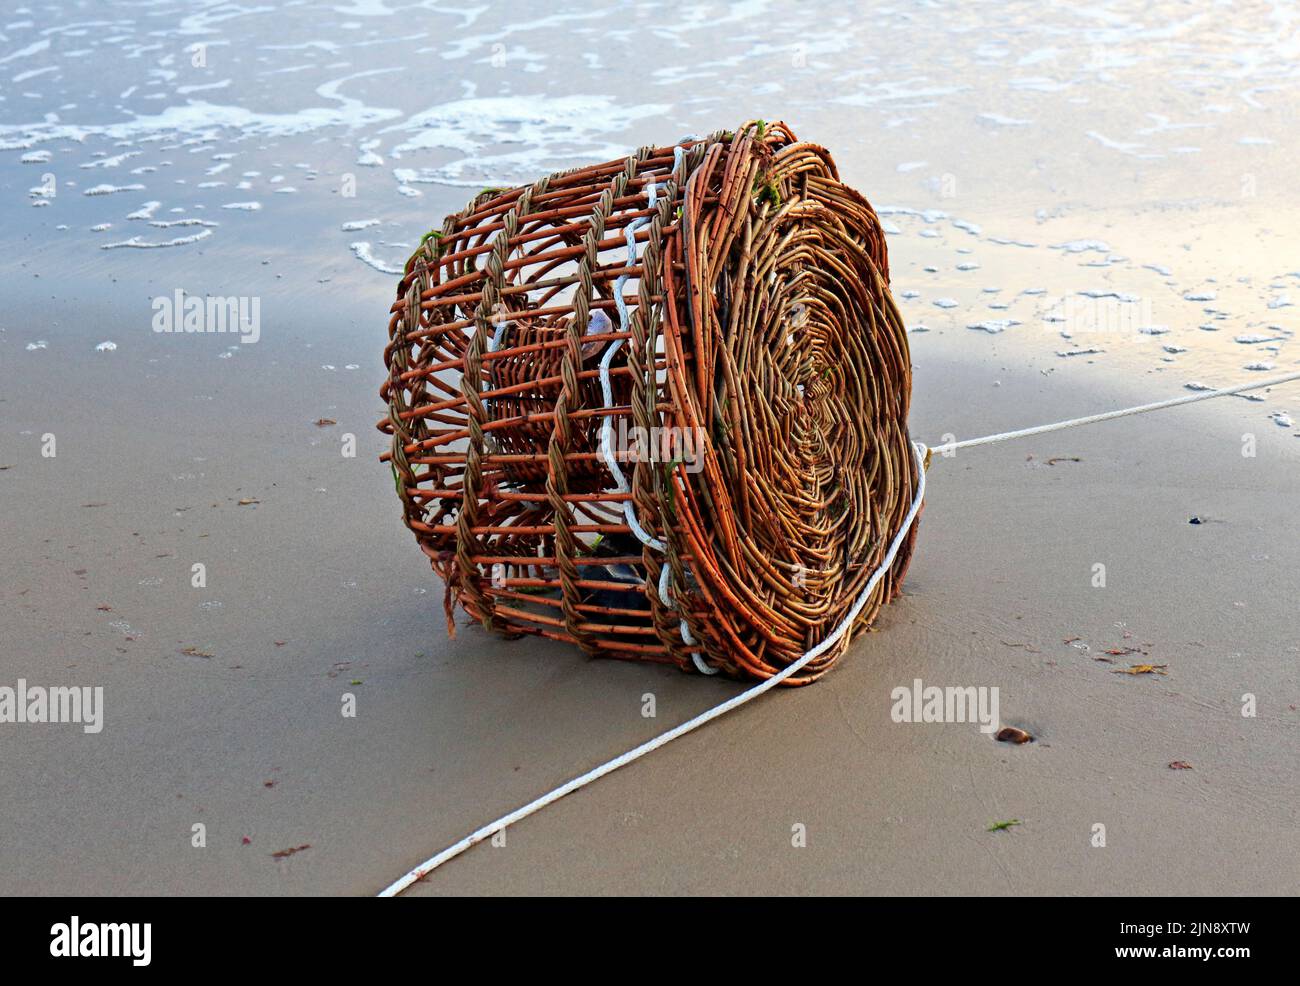 A traditional round wicker lobster or crab pot trap washed up on a Norfolk beach at Cart Gap, Happisburgh, Norfolk, England, United Kingdom. Stock Photo